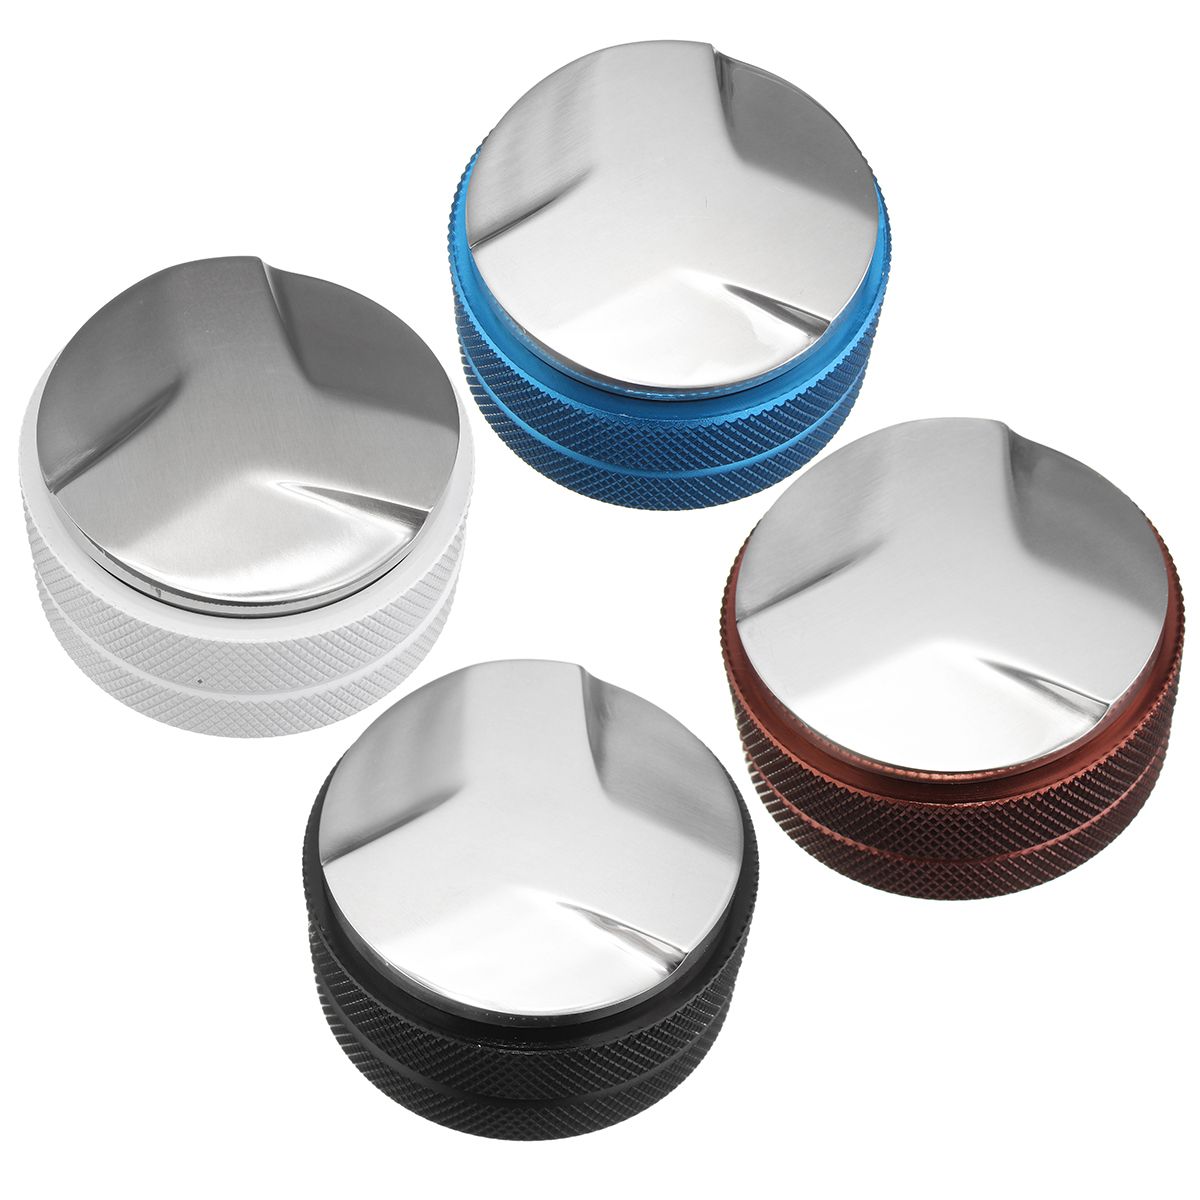 58mm-Adjustable-Palm-Coffee-Tamper-Stainless-Steel-Three-Angle-Slopes-Base-4-Colors-1169702